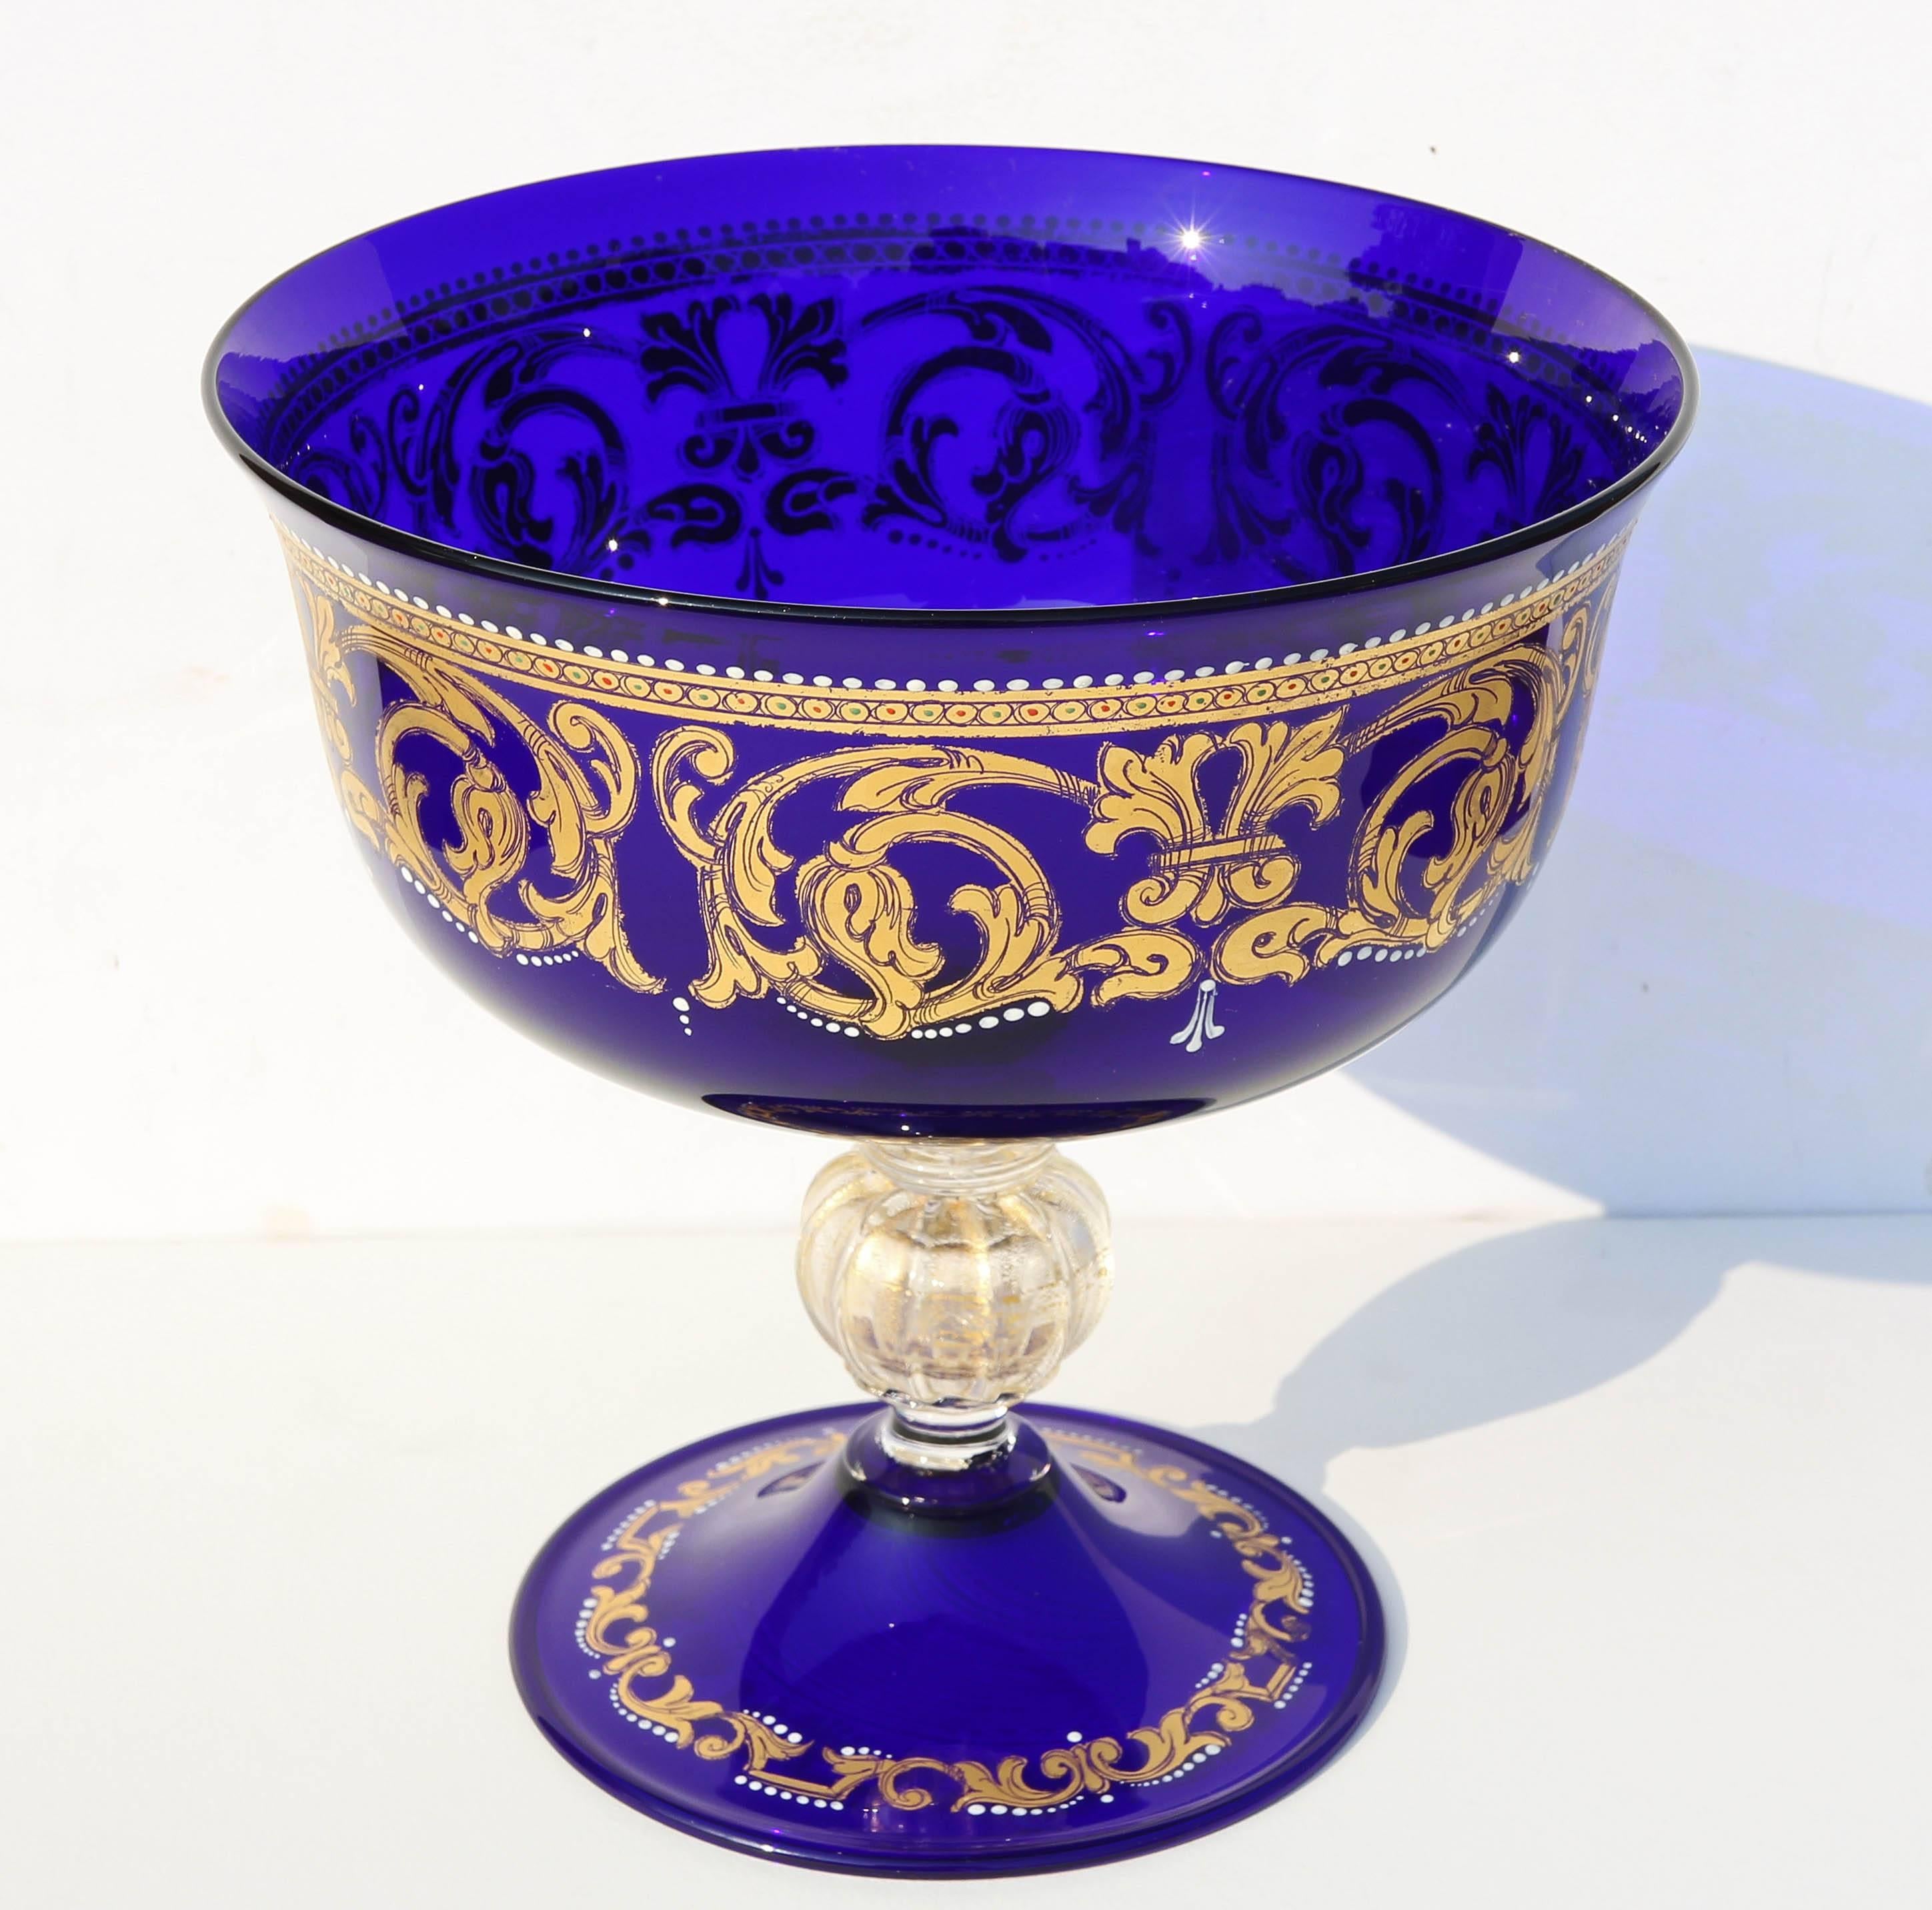 Vintage handmade Murano glass centrepiece by Salviati. Cobalt blue glass decorated with gold gilt and enamel. Signed on bottom, circa 1920s.